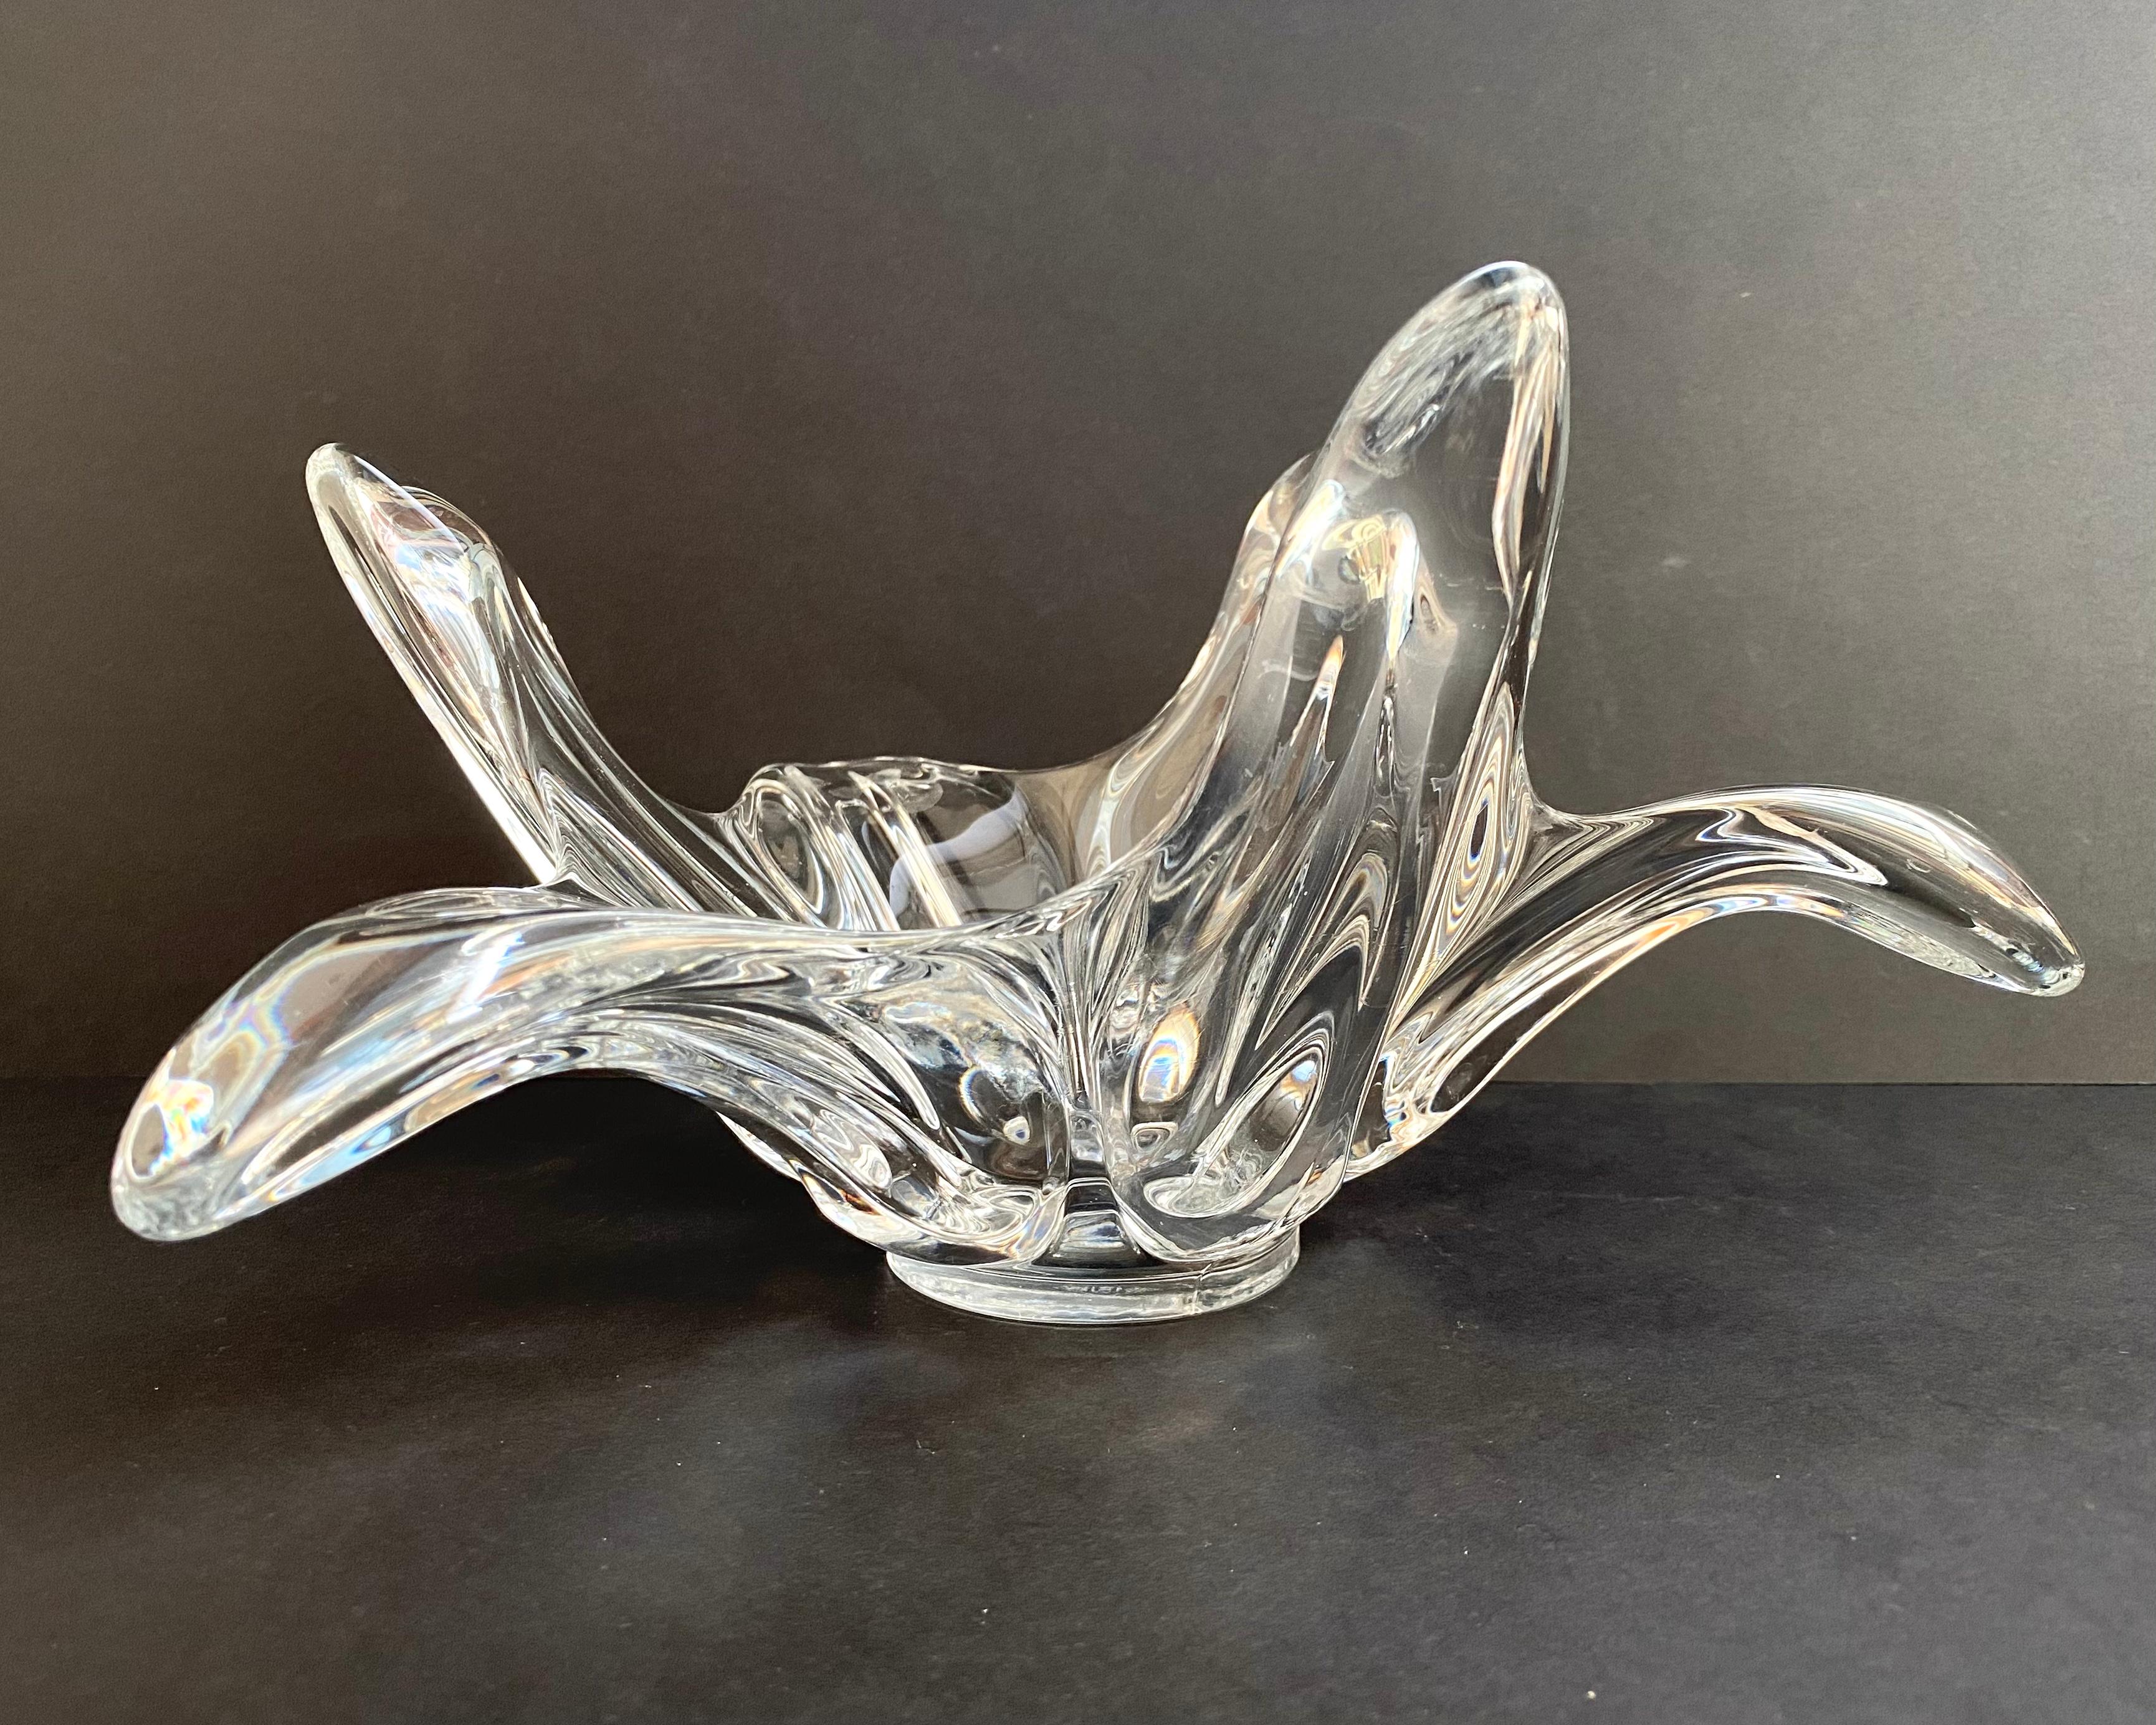 Adorable translucent hand-blown crystal glass fruit bowl or centerpiece by Art de Vannes France, 1960s.

Heavy lead crystal Bowl in shape of a starfish or flower.

Adorable translucent hand-blown crystal glass fruit bowl.

Discontinued